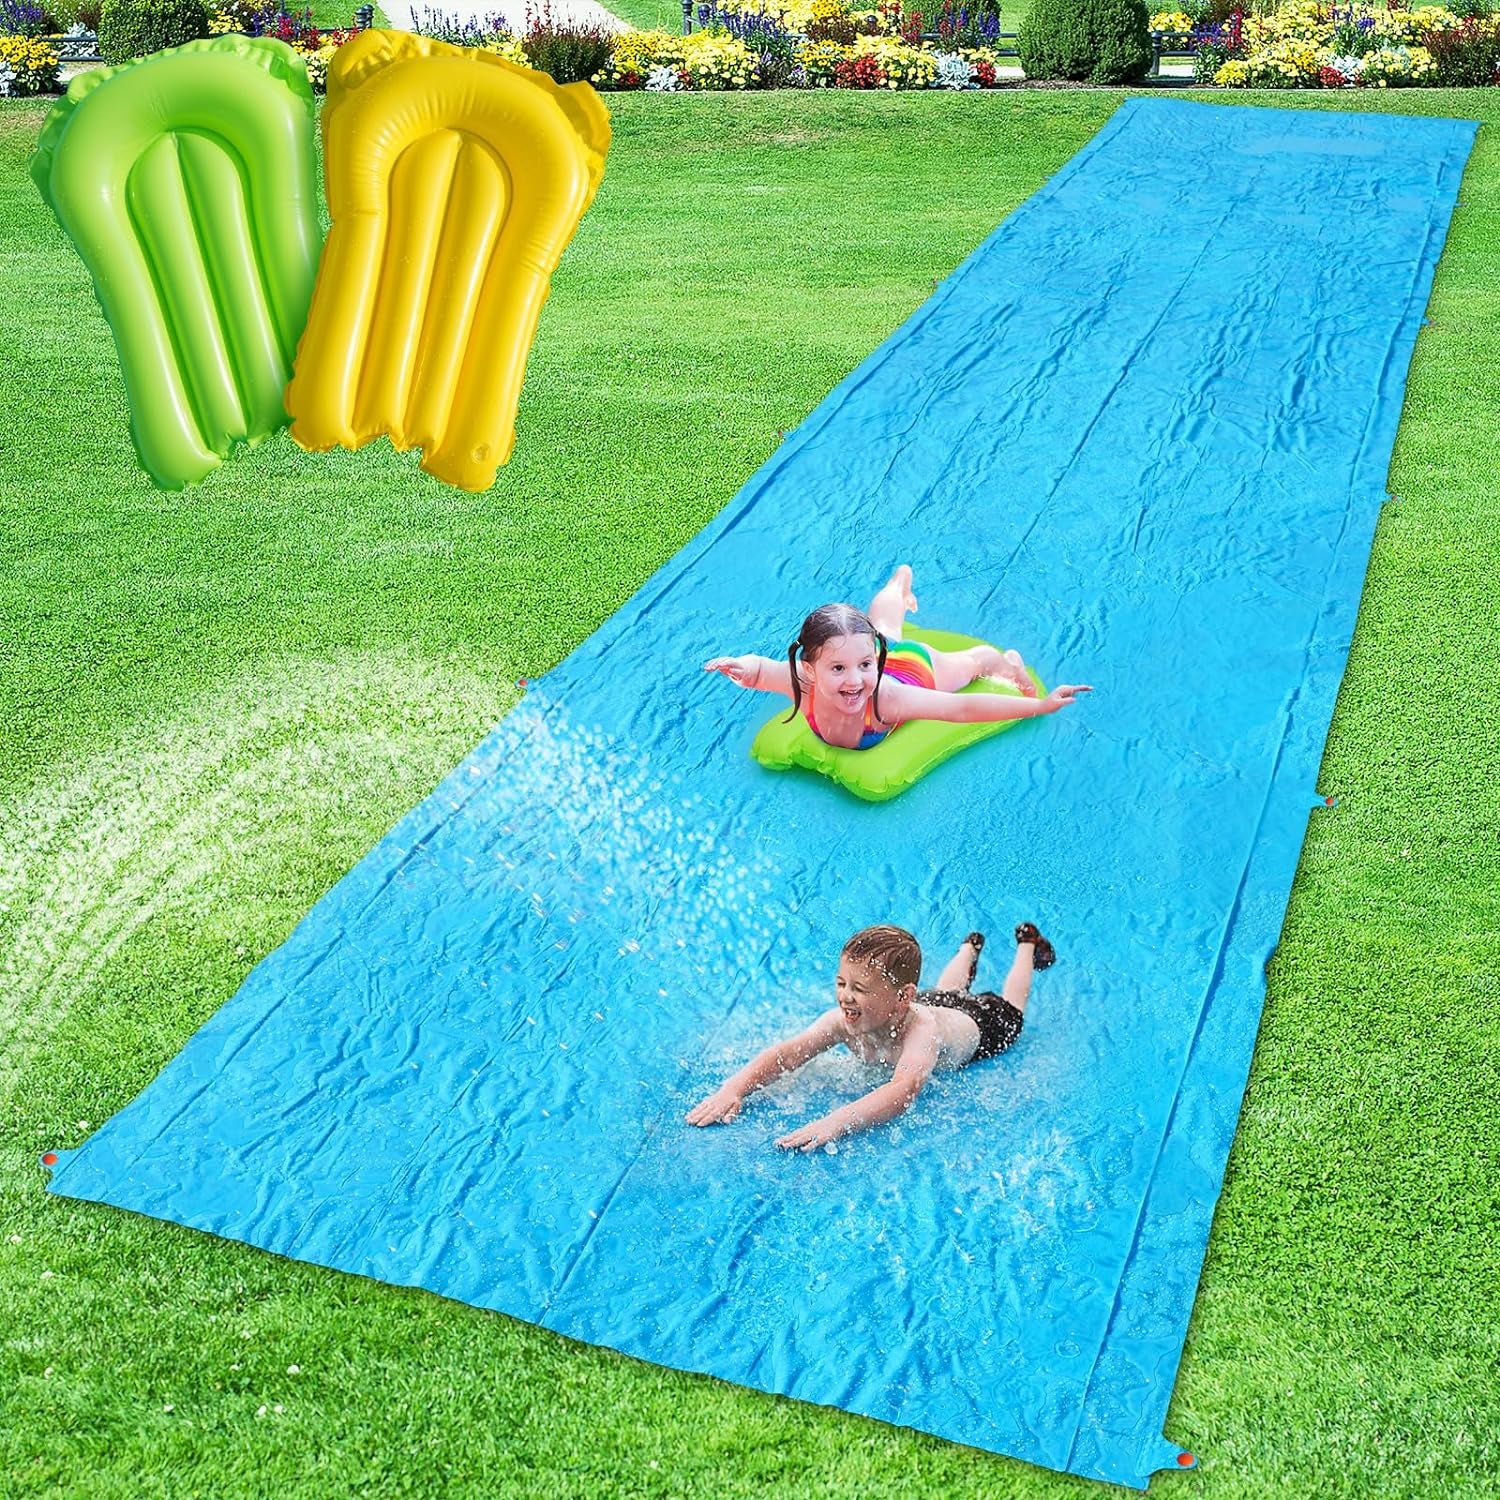 40FT Slip Lawn Water Slide, Giant Slip, Splash and Slide for Kids Teens and Adults - Summer Slip Water and Slides Heavy Duty for Outdoor Backyard Lawn Summer Party with 14 Stakes and 2 Bodyboards